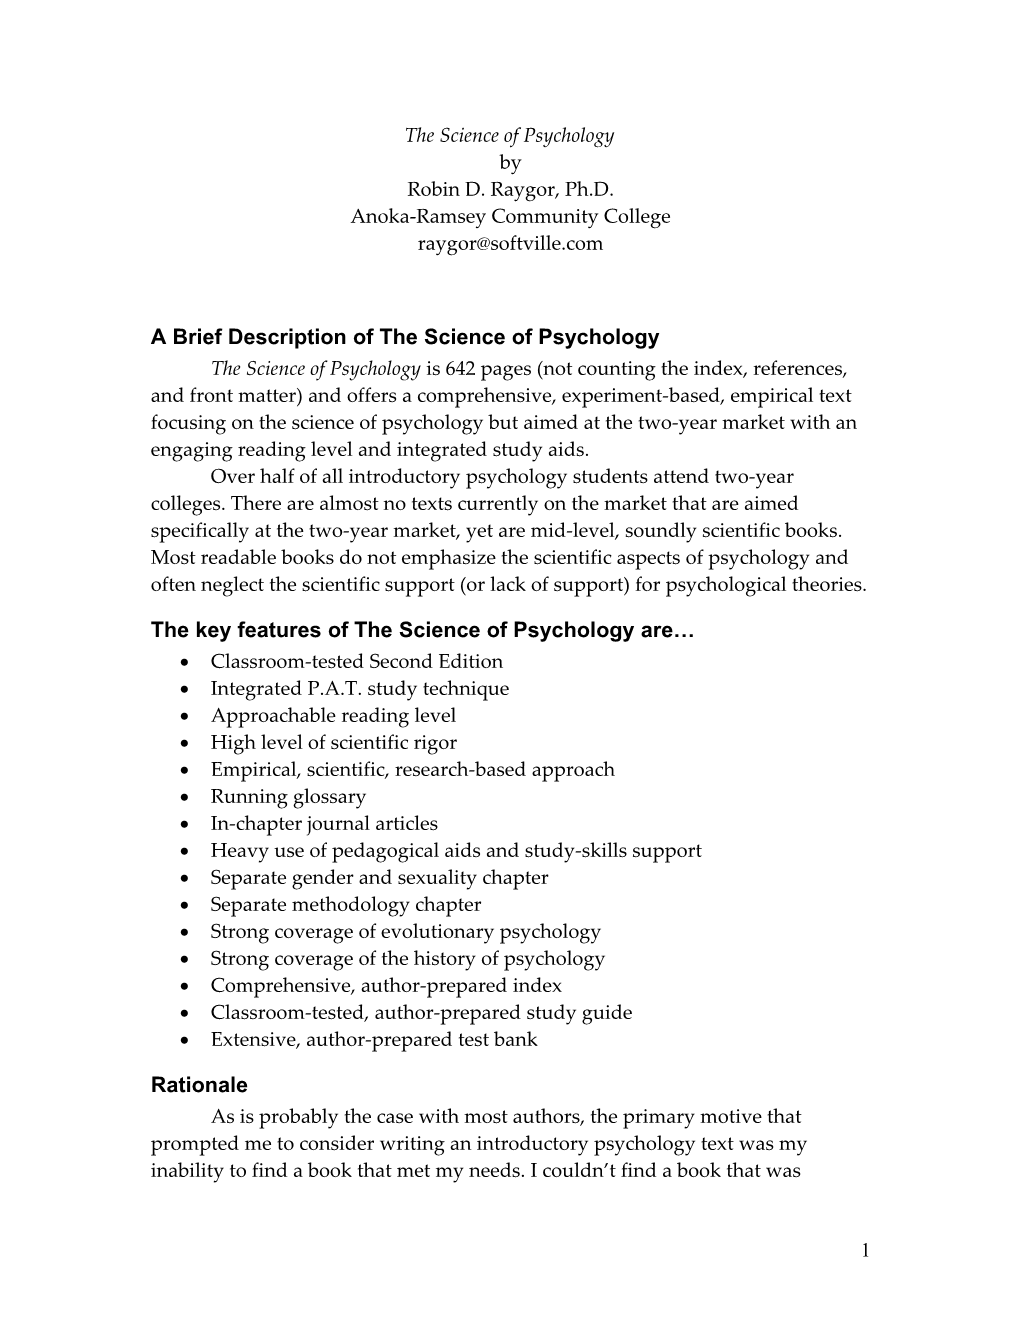 A Brief Description of the Science of Psychology